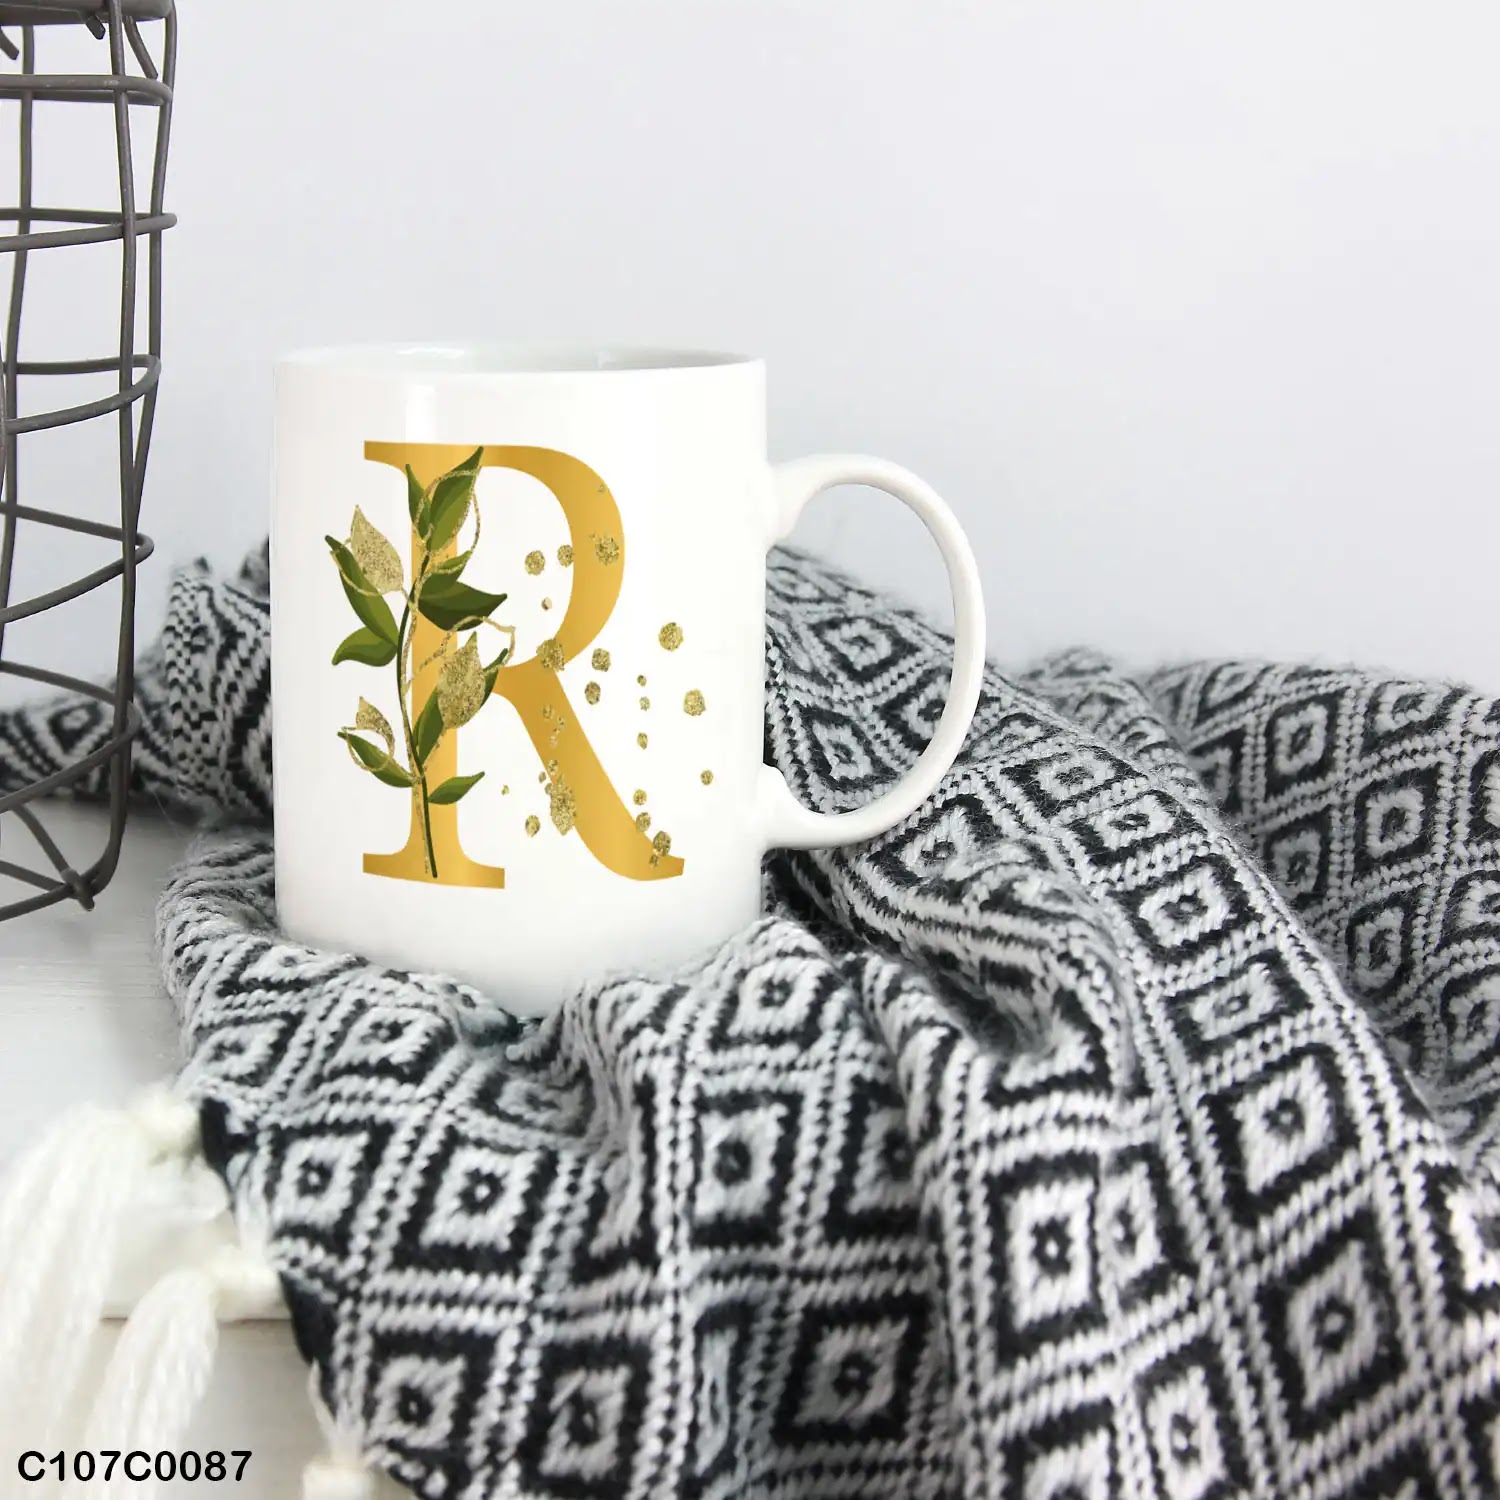 A white mug (cup) printed with gold Letter "R" and small green branch